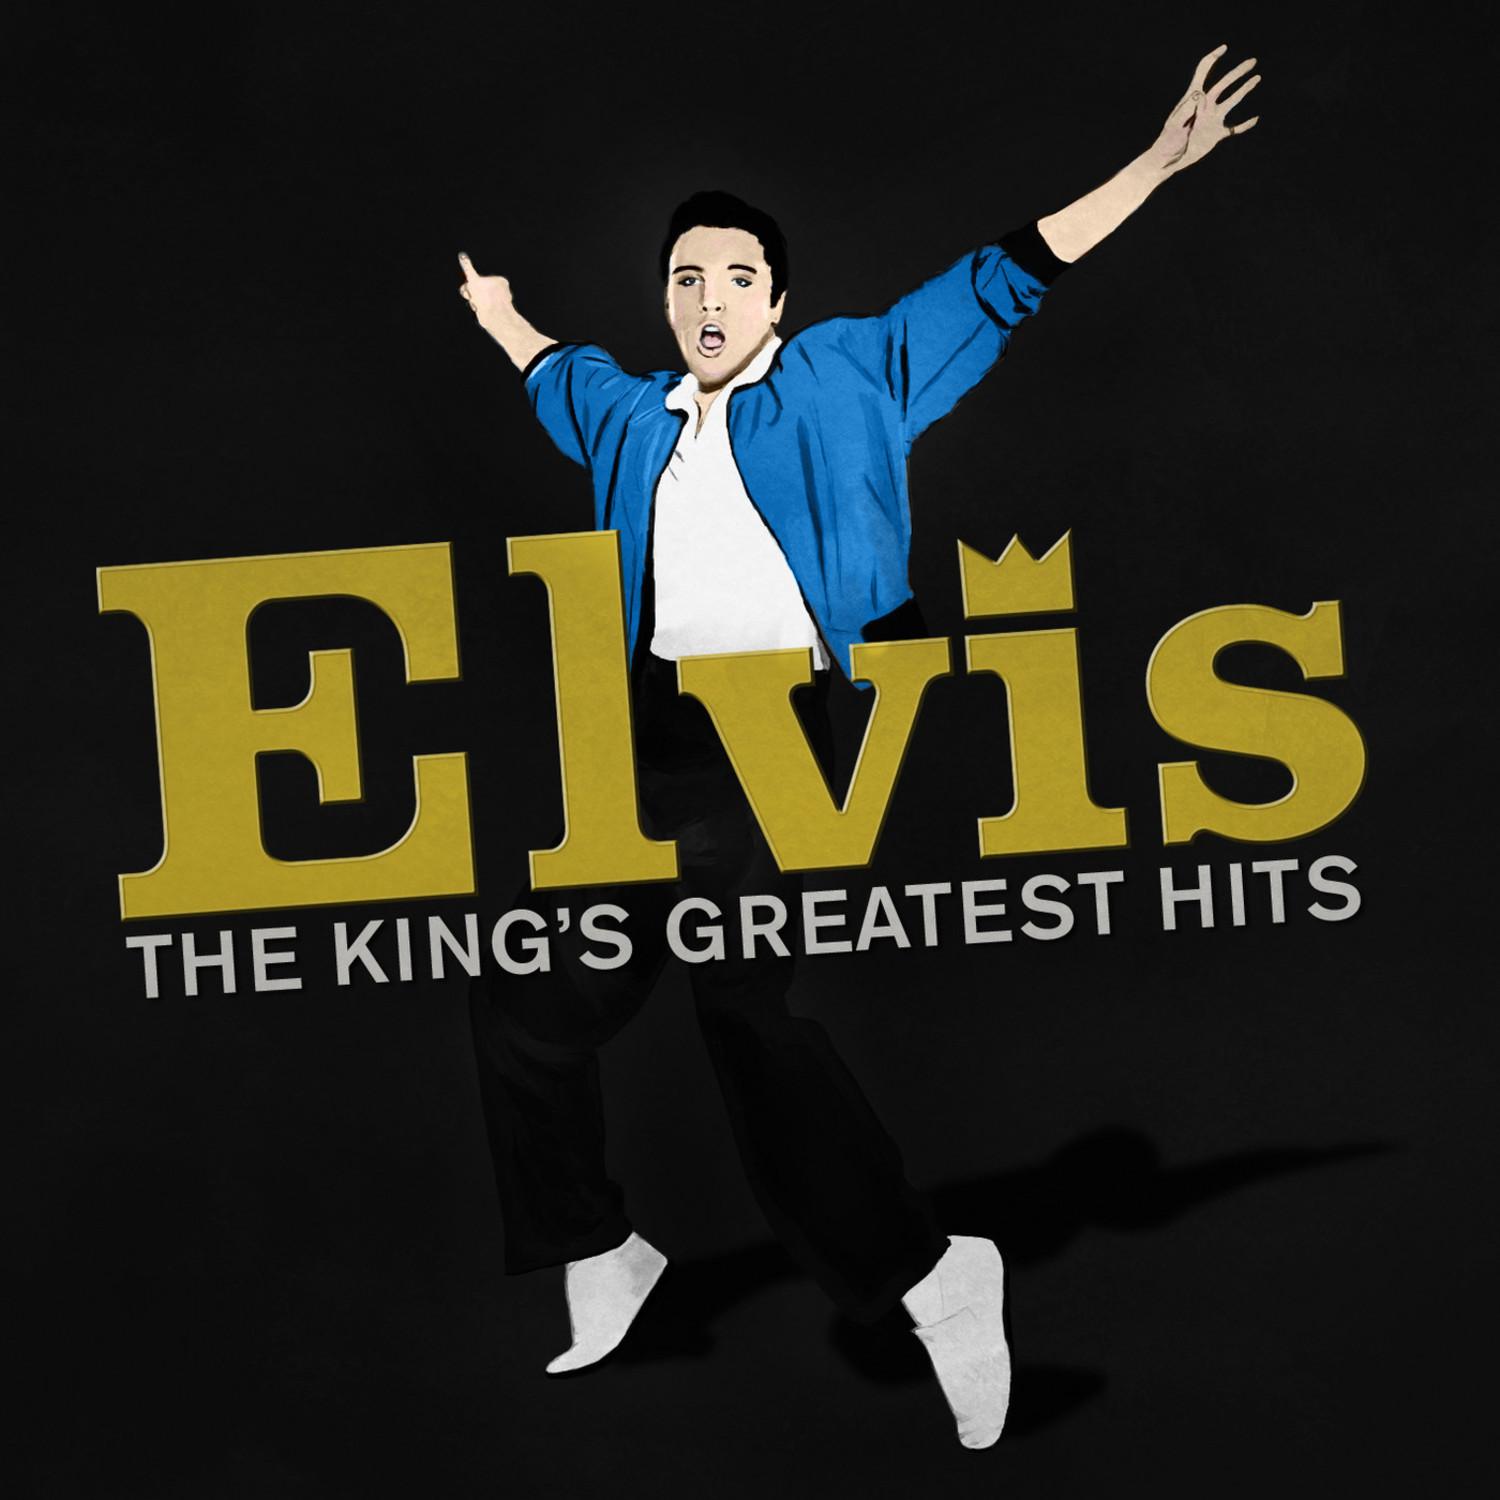 The King's Greatest Hits